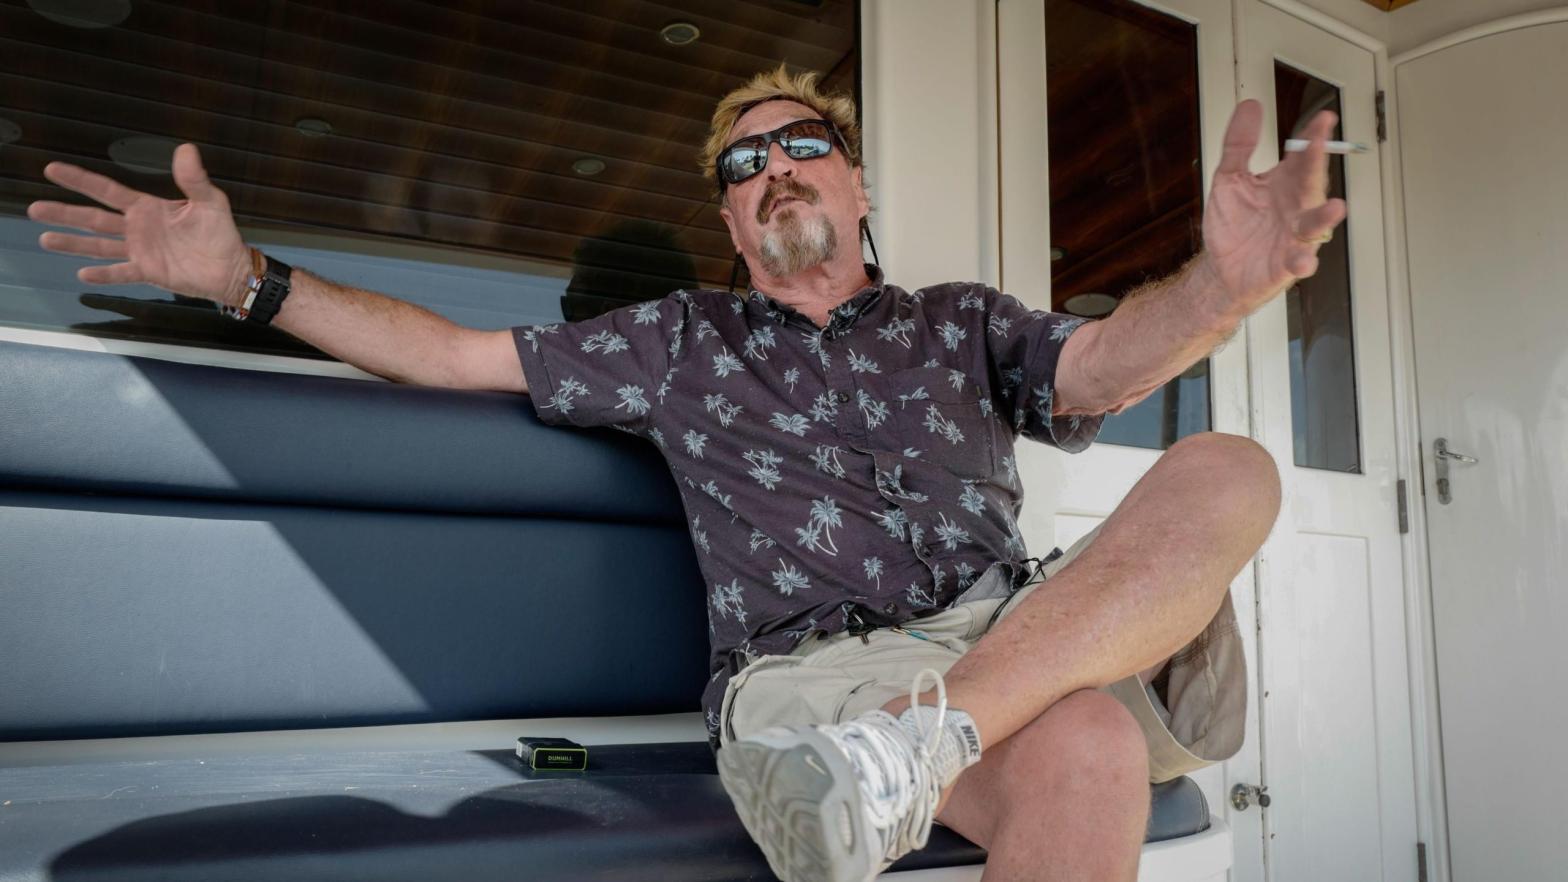 John McAfee during an interview with Agence France-Presse while anchored on his (heavily armed) yacht at the Marina Hemingway in Havana, Cuba, in June 2019. (Photo: Adalberto Roque / AFP, Getty Images)